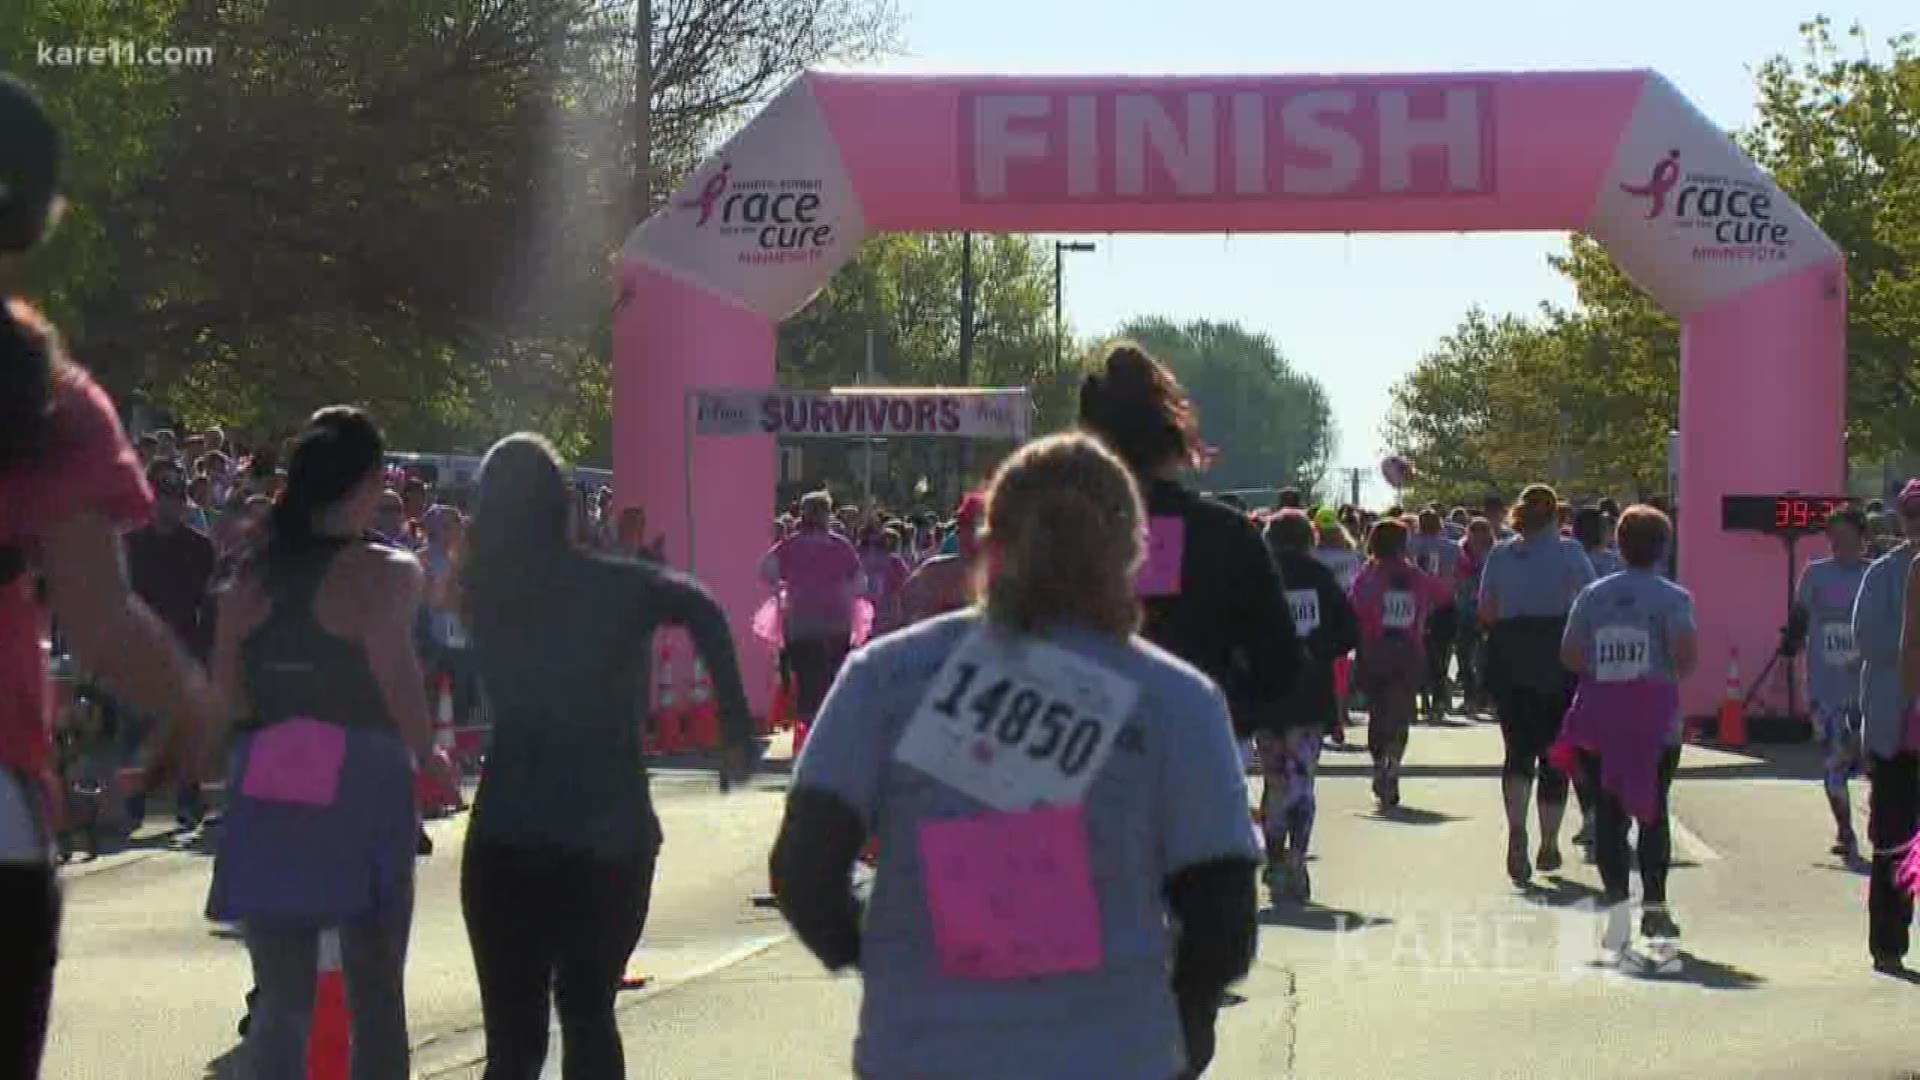 For thousands who participated in the 2018 Susan G. Komen Race for the Cure Twin Cities, moving forward with a purpose changed the game.